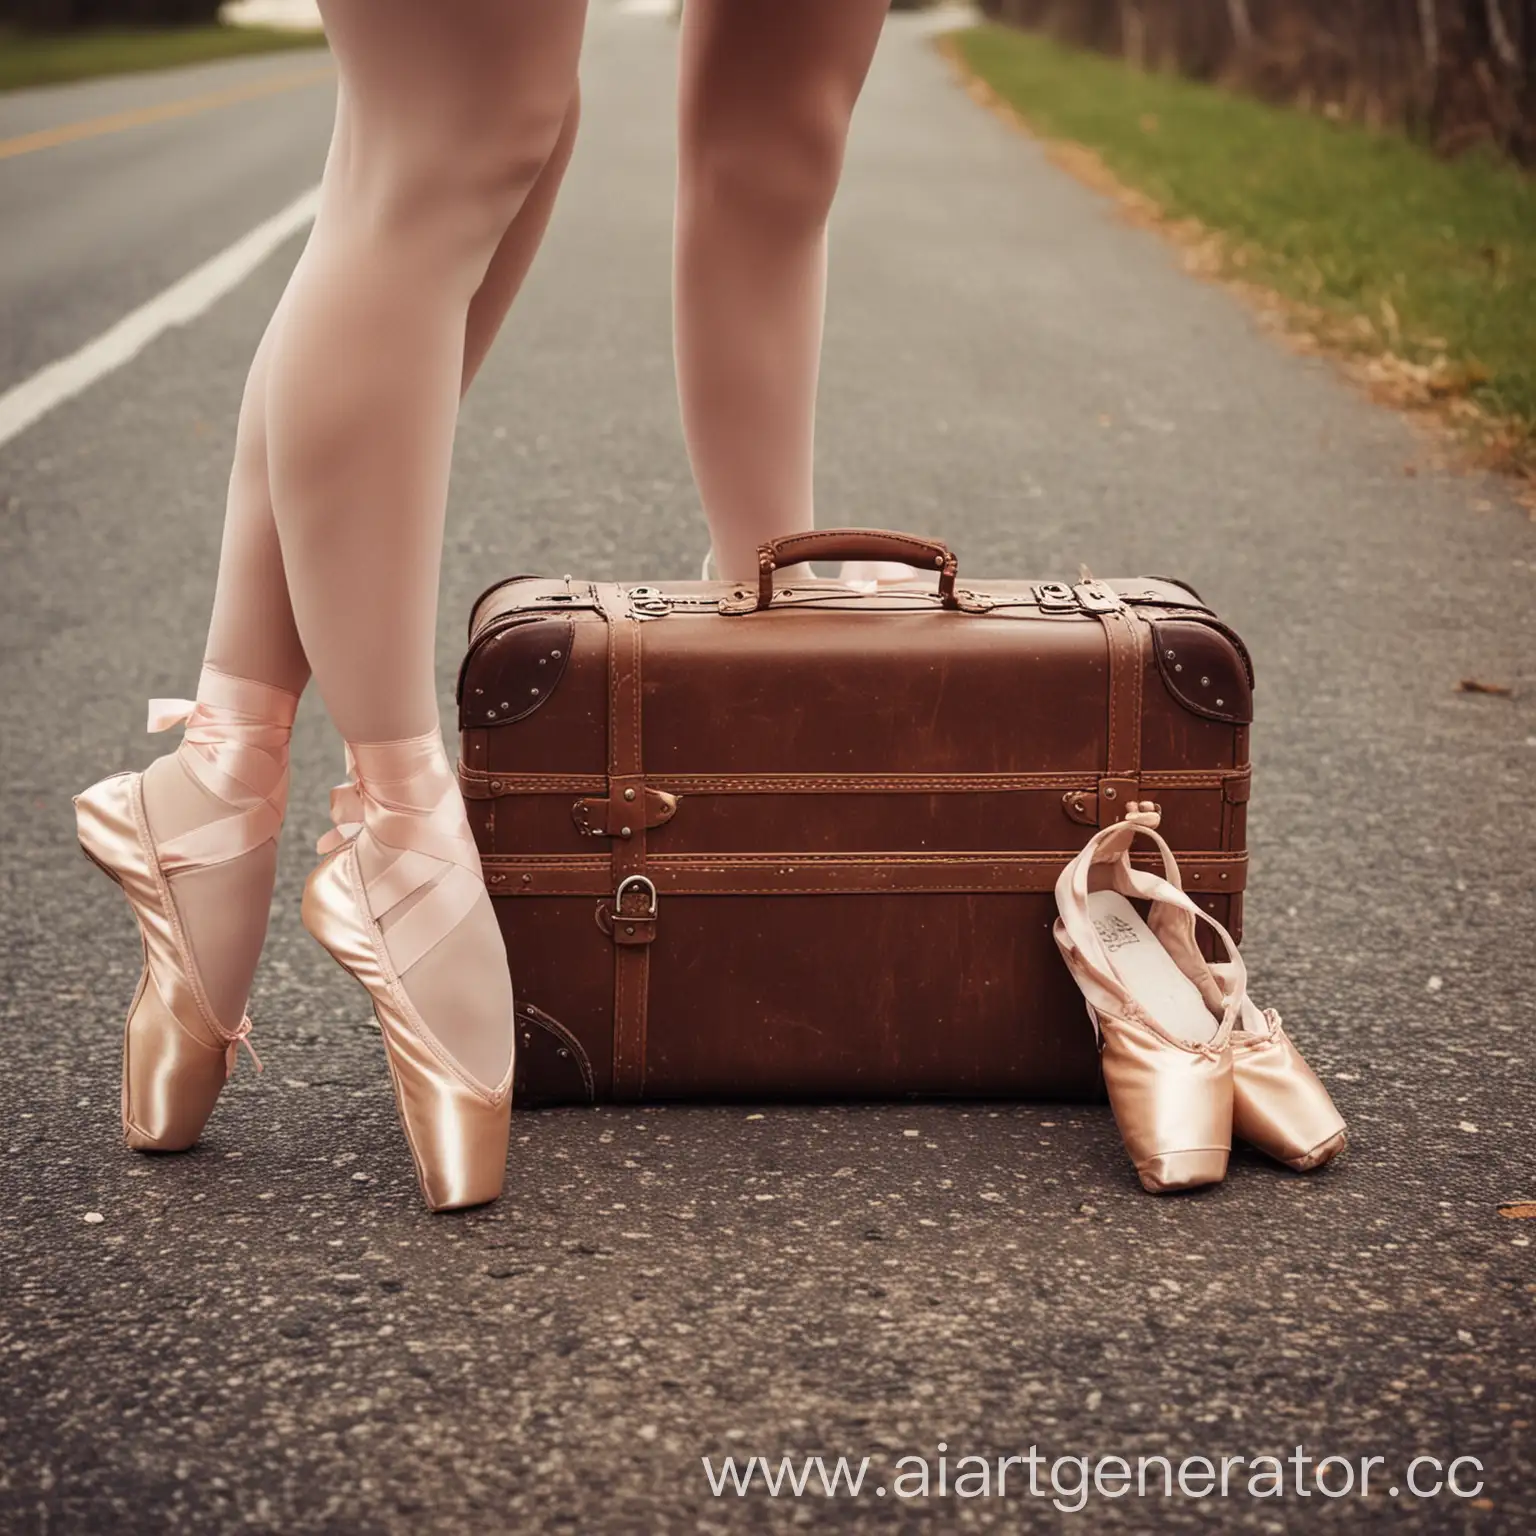 Young-Ballerina-Girl-with-Suitcase-and-Pointe-Shoes